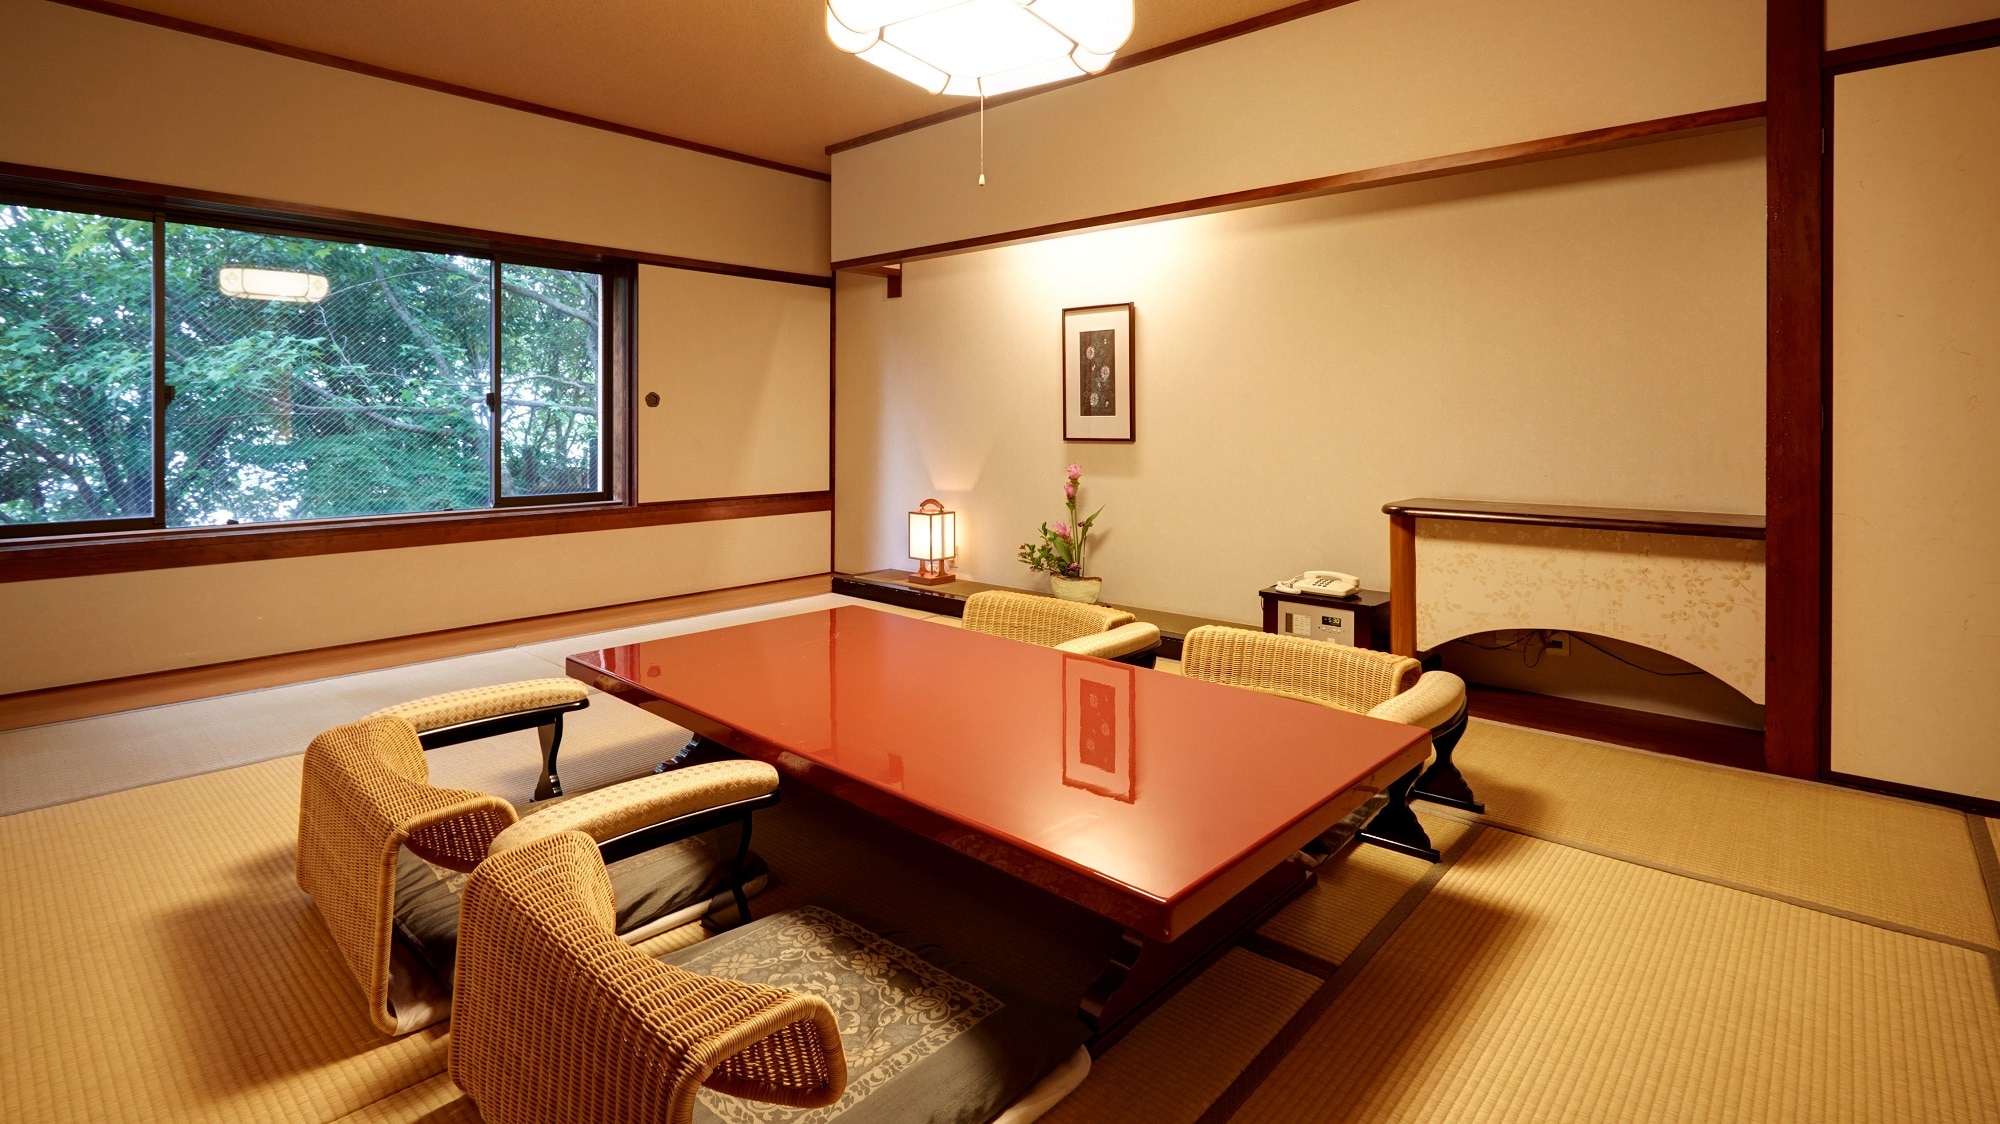 Japanese-style suite with 12 tatami mats in the bedroom